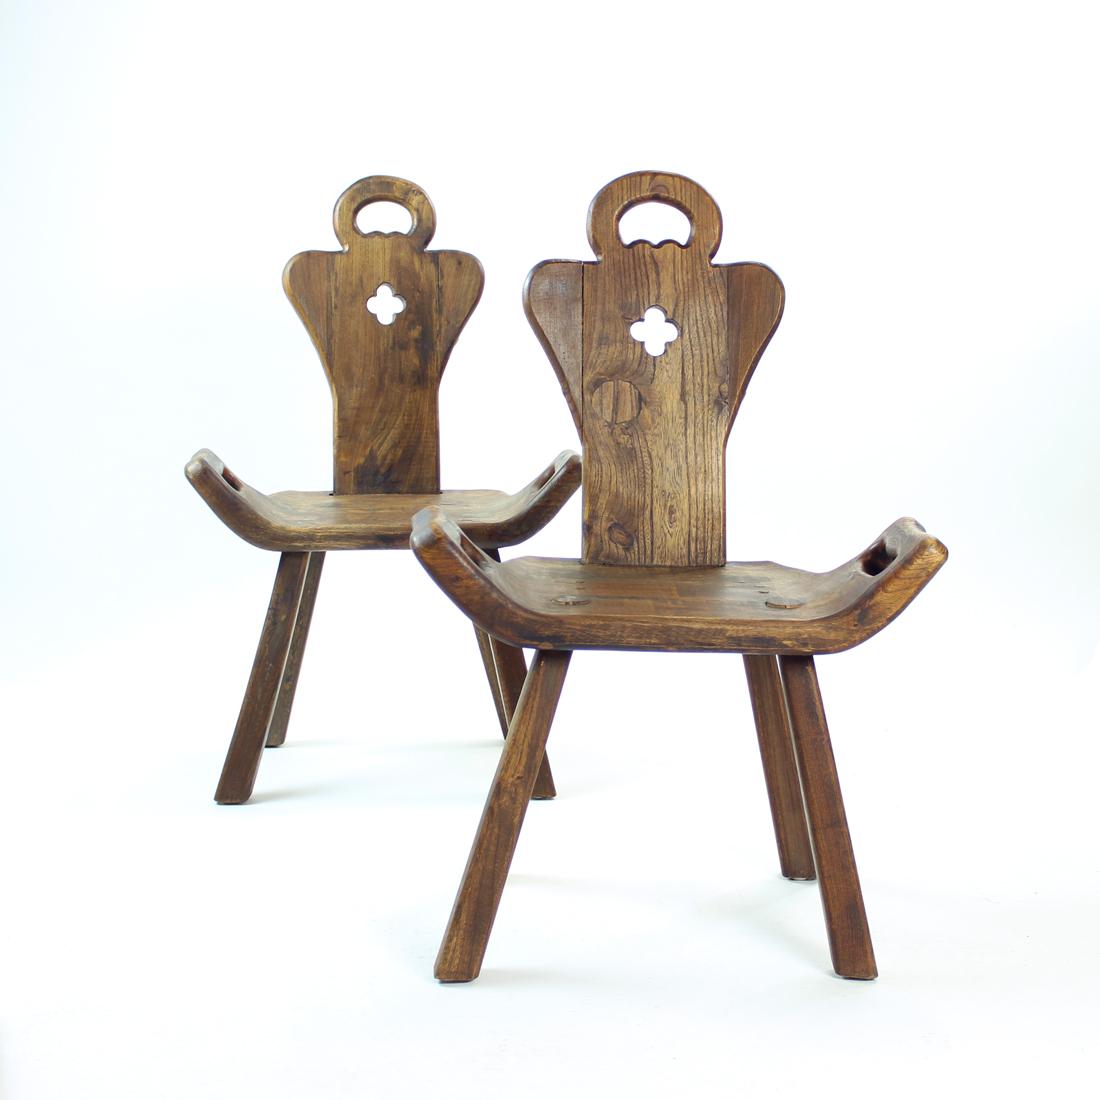 Wooden Handmade Occassional Chair, Holland 1920s For Sale 6